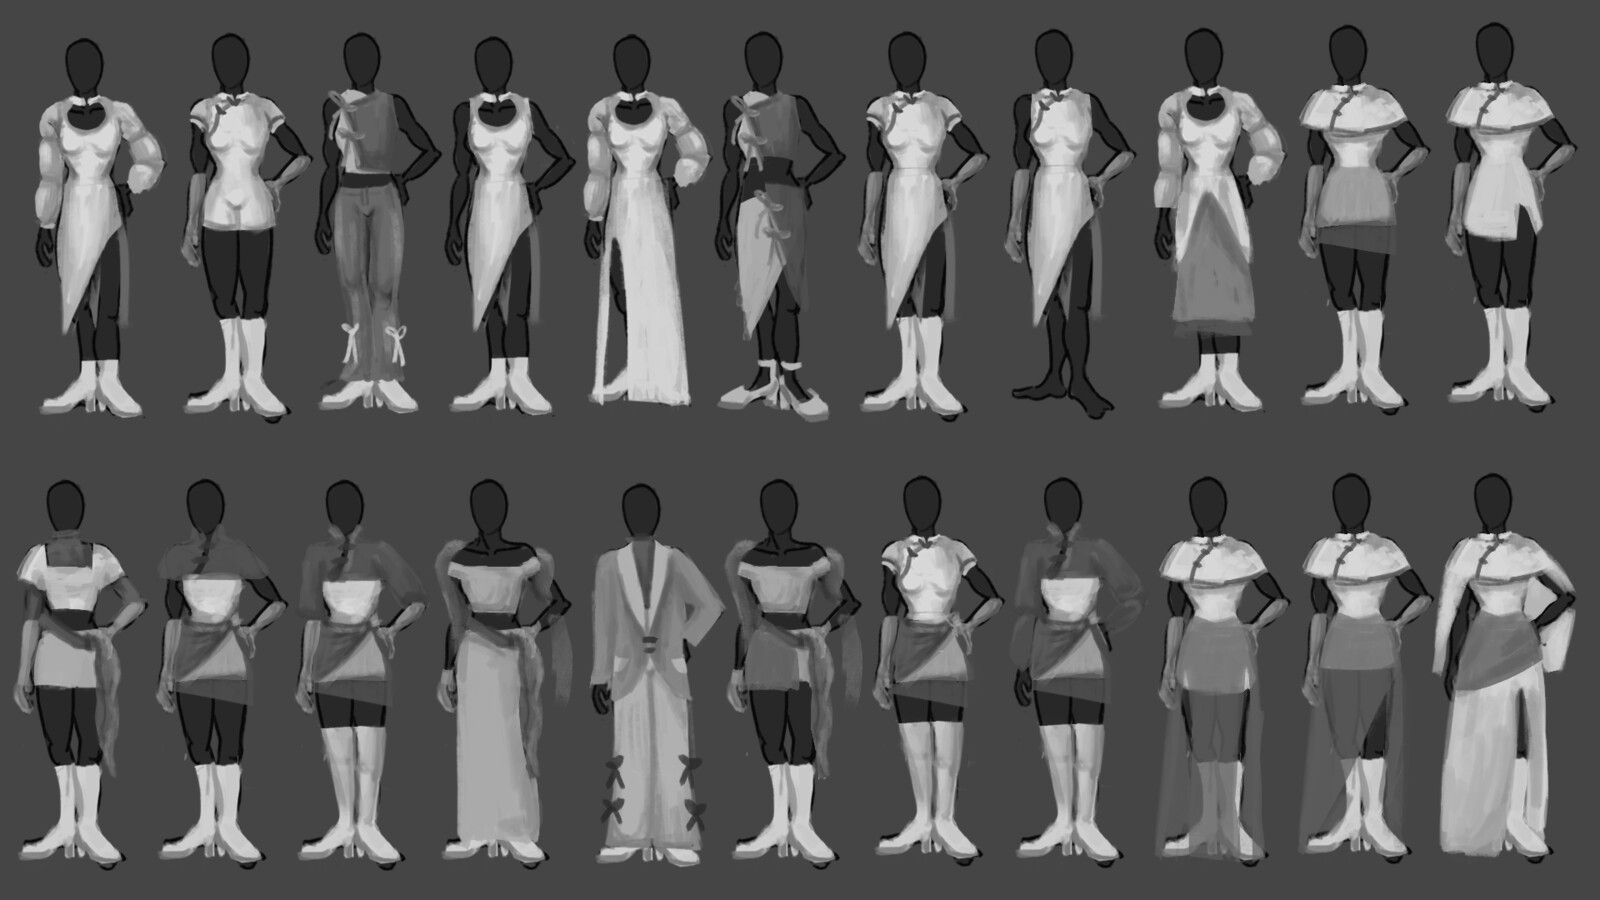 Outfit iterations - further variations on the options I liked from my first version of silhouettes. 